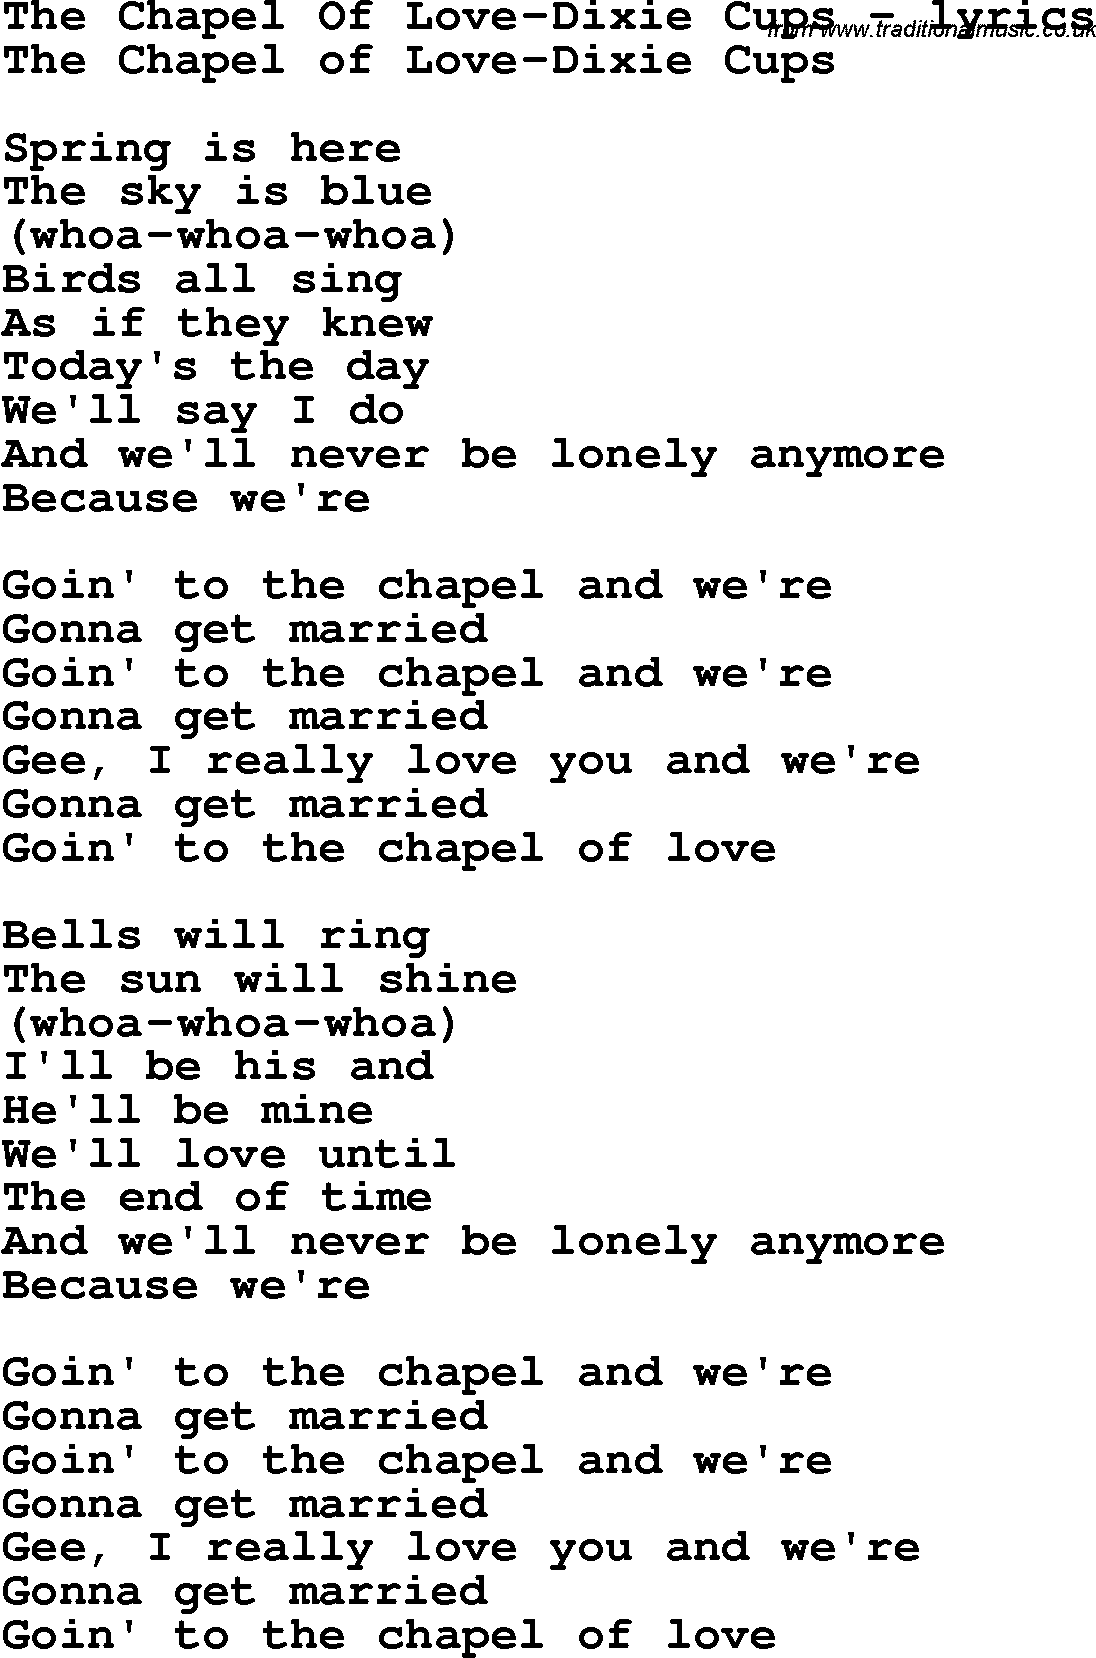 Love Song Lyrics for: The Chapel Of Love-Dixie Cups